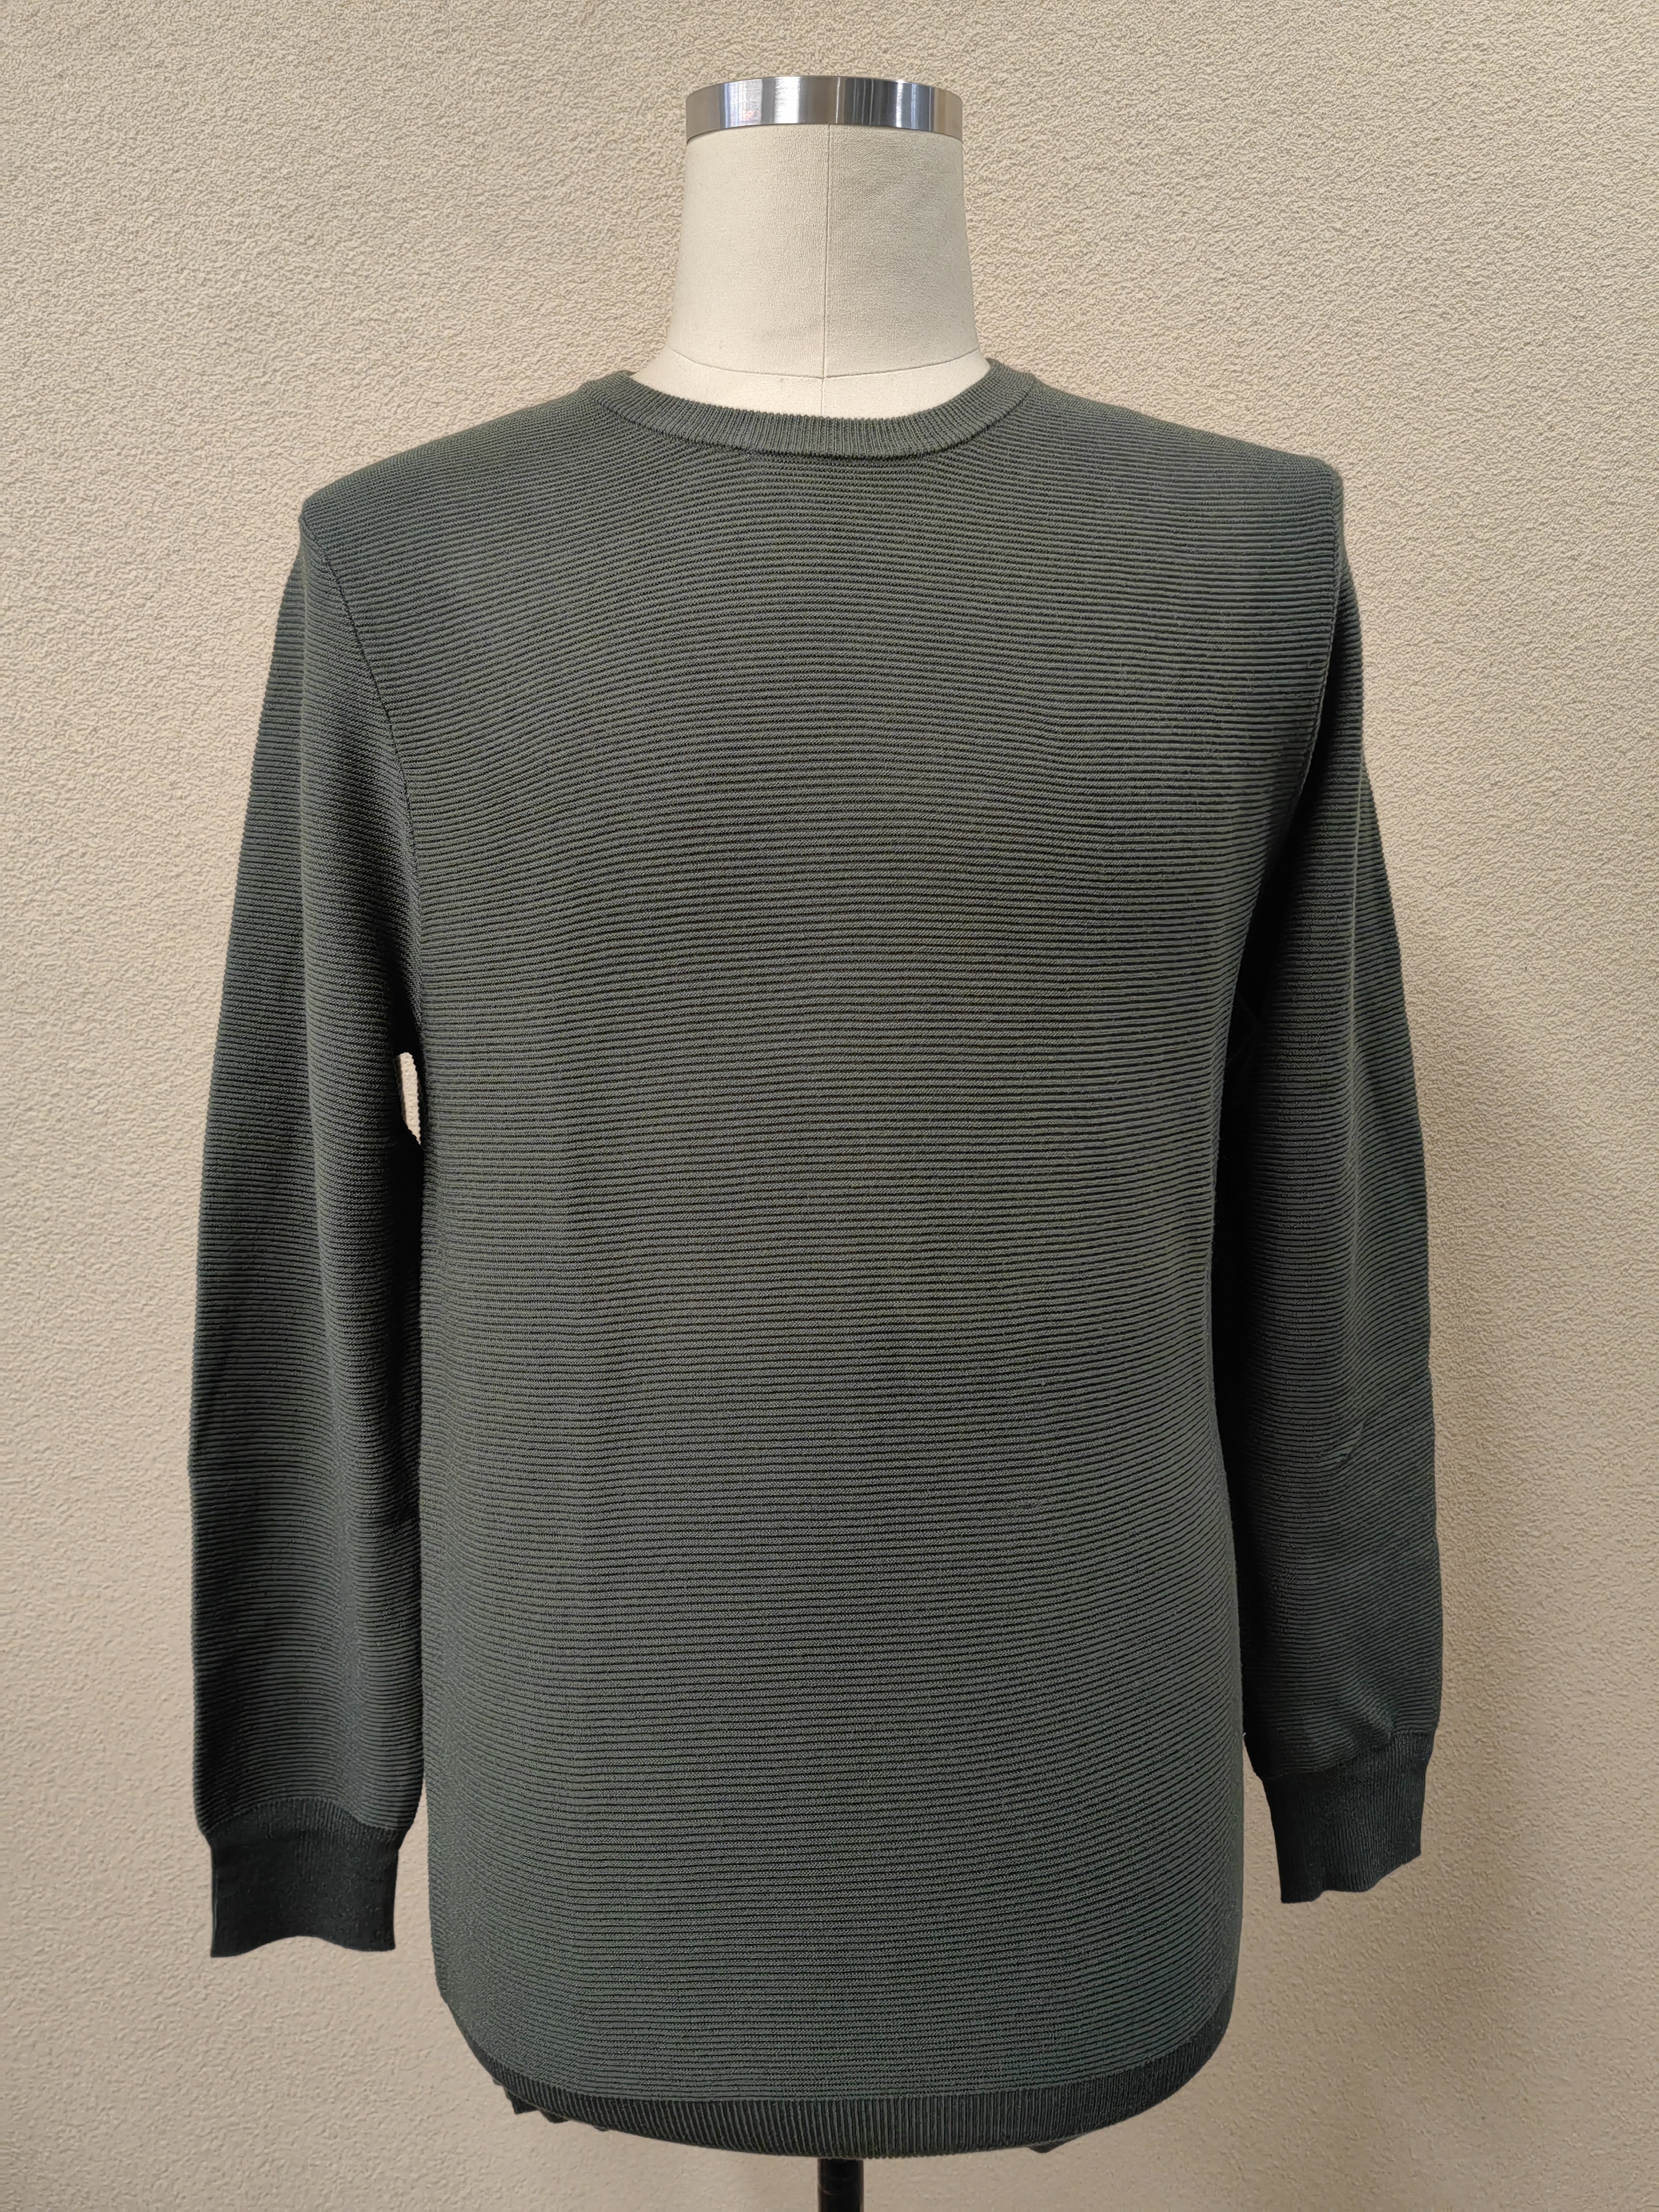 Chinse Supplier Navy Green Knitted Wool Plain Long Sleeve Men\'s Turtleneck Pullovers Sweater 